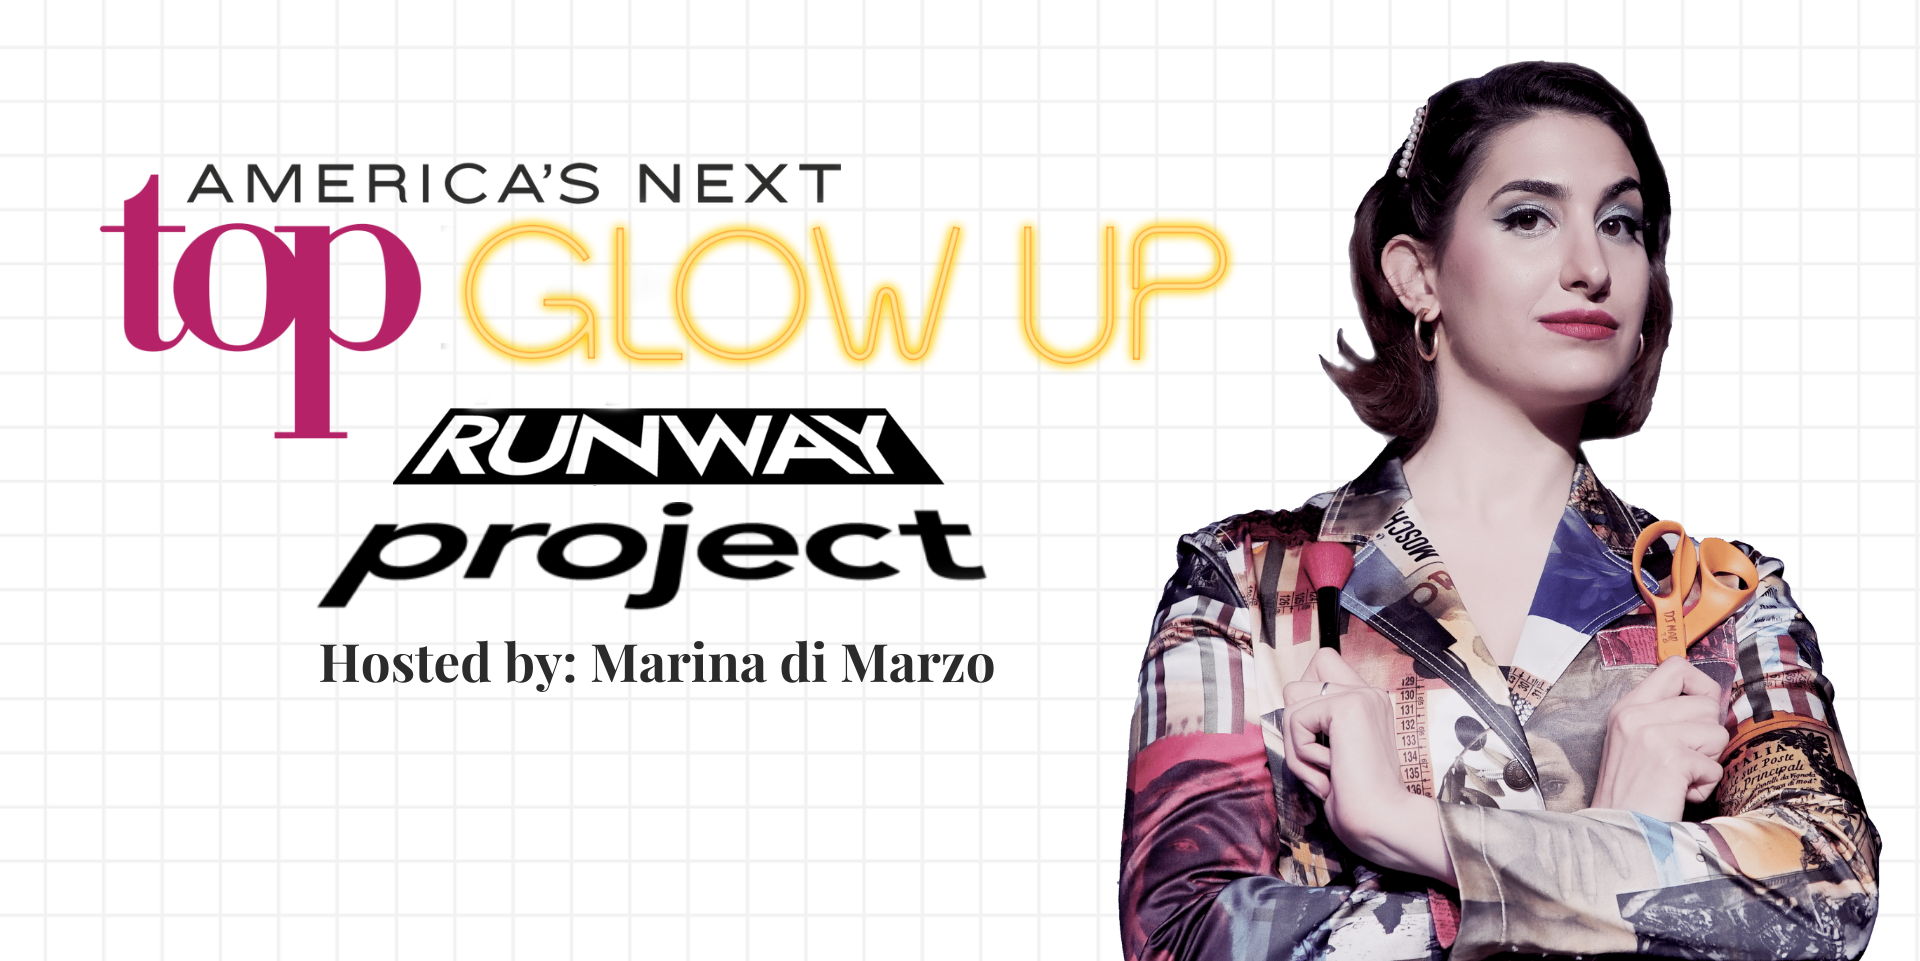 AMERICA’S NEXT TOP GLOW UP RUNWAY PROJECT promotional image